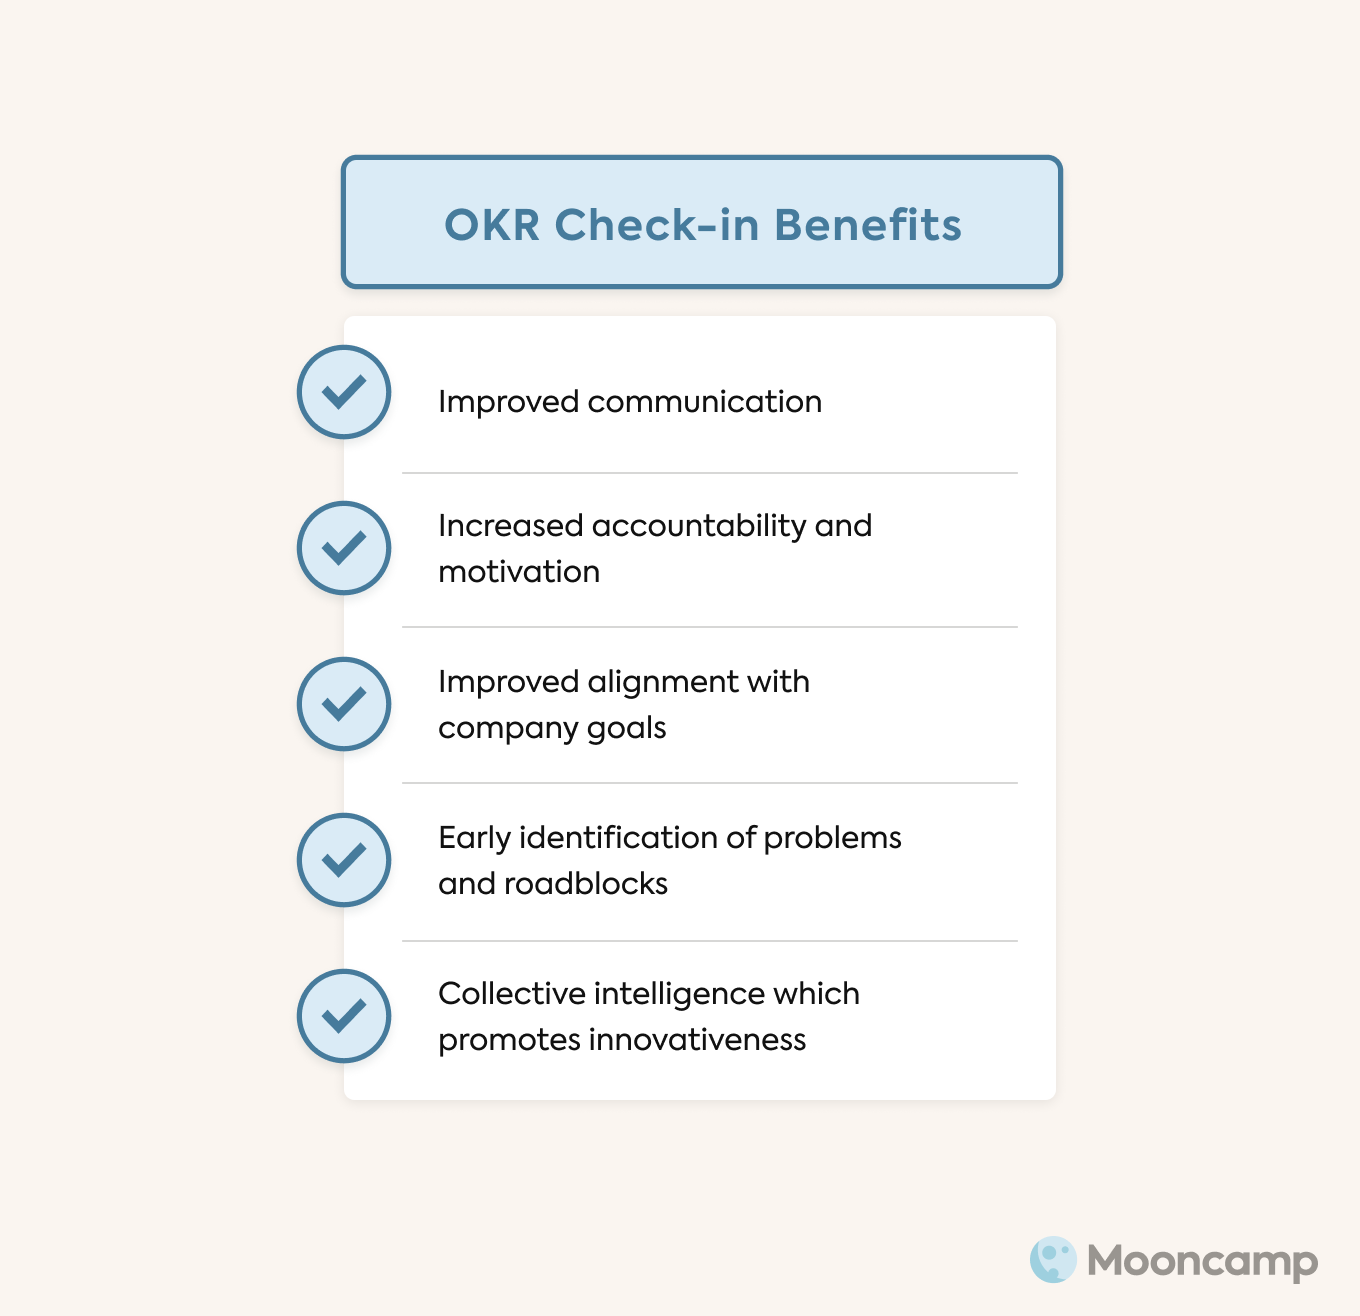 OKR Check-in benefits